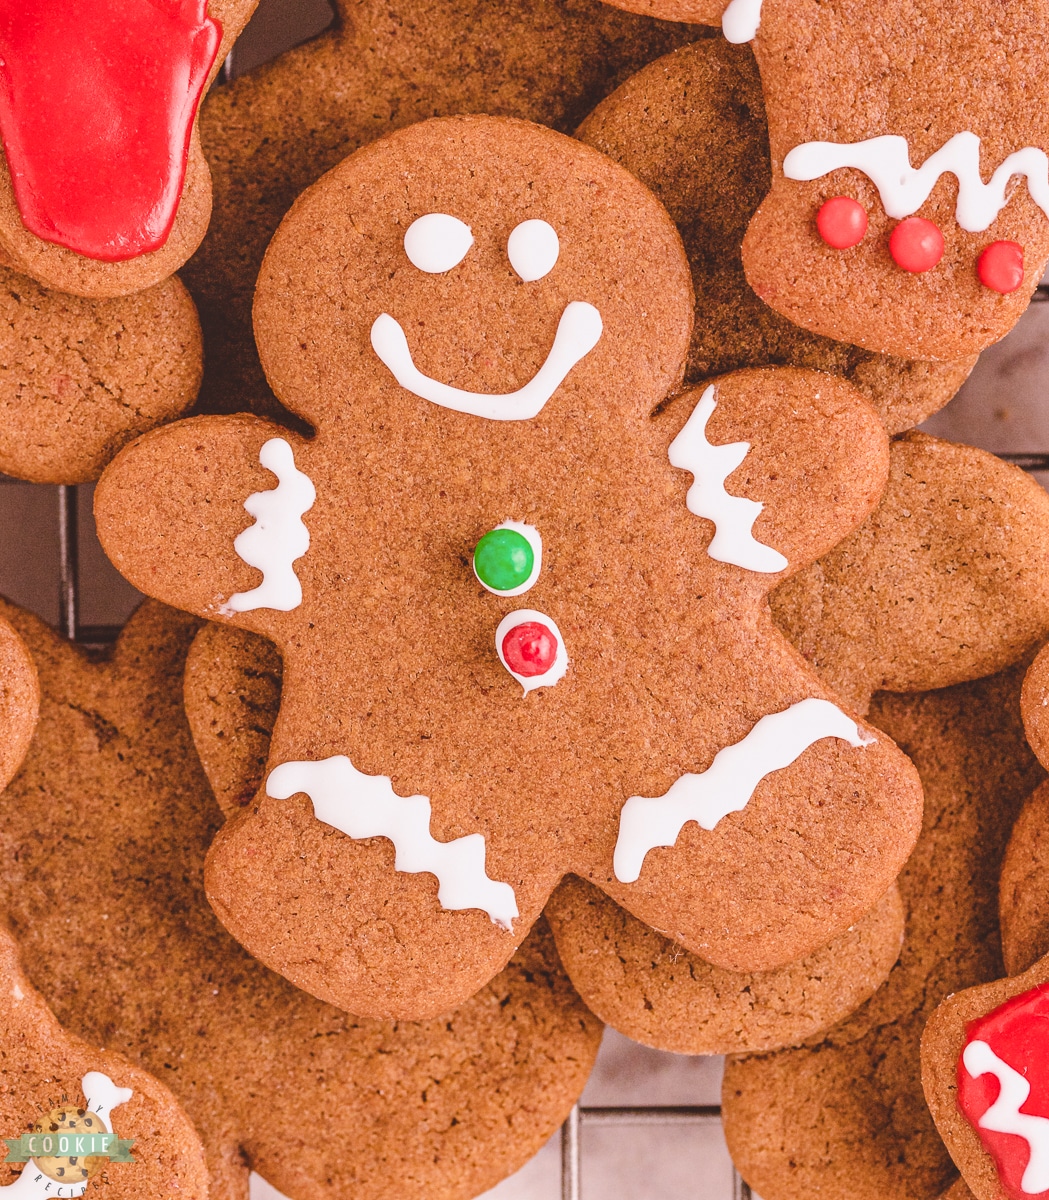 gingerbread man cookie decorated